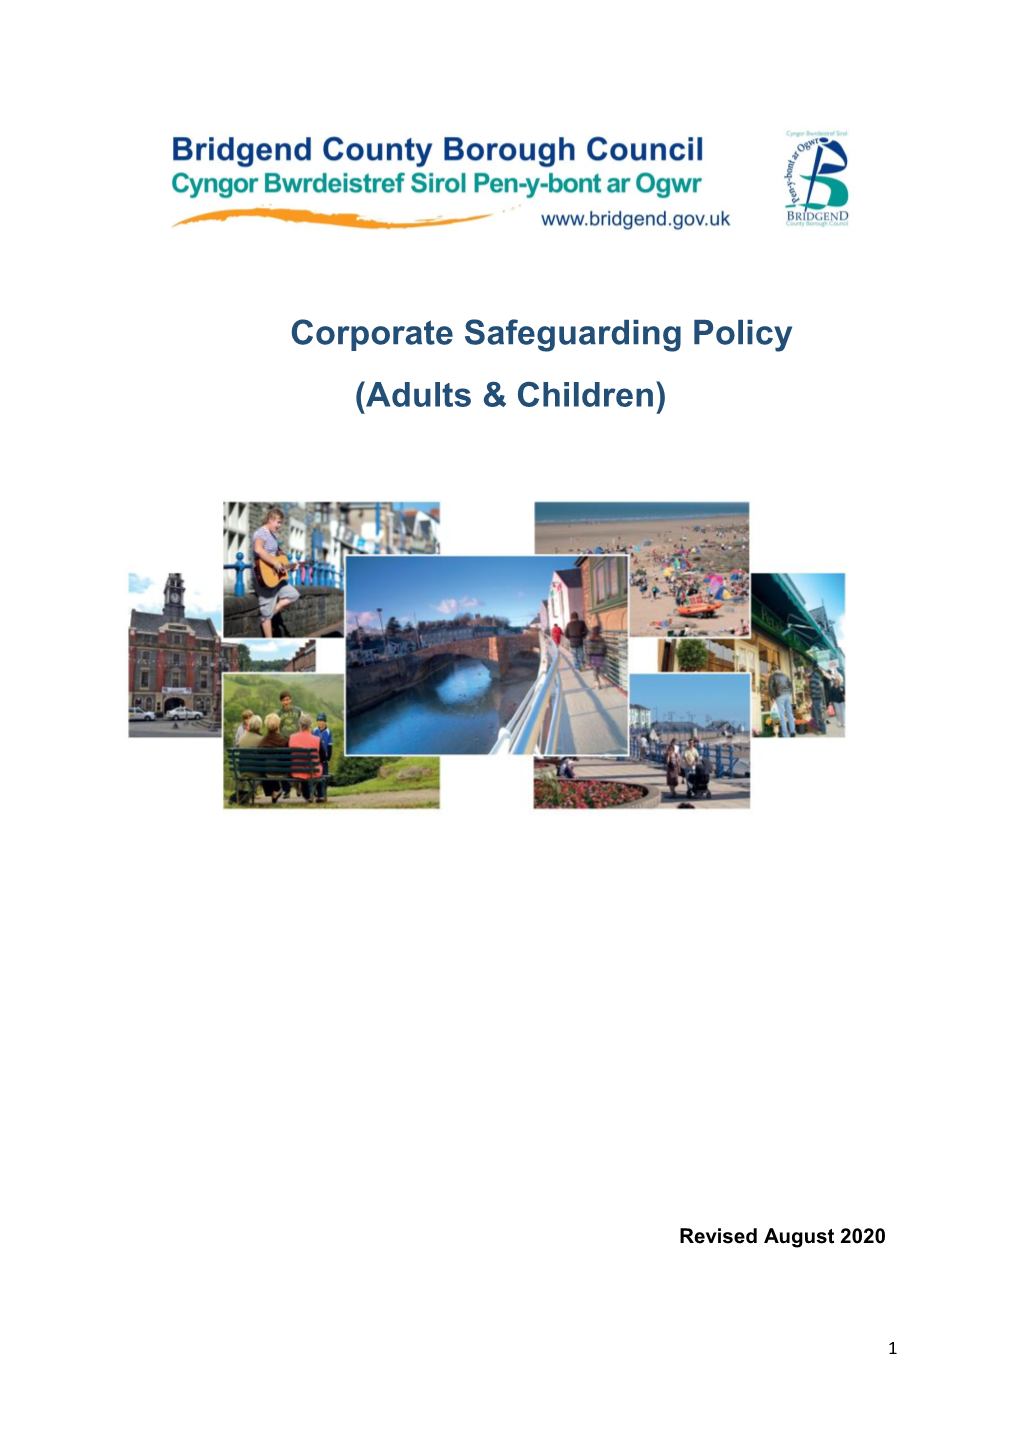 Corporate Safeguarding Policy (Adults & Children)